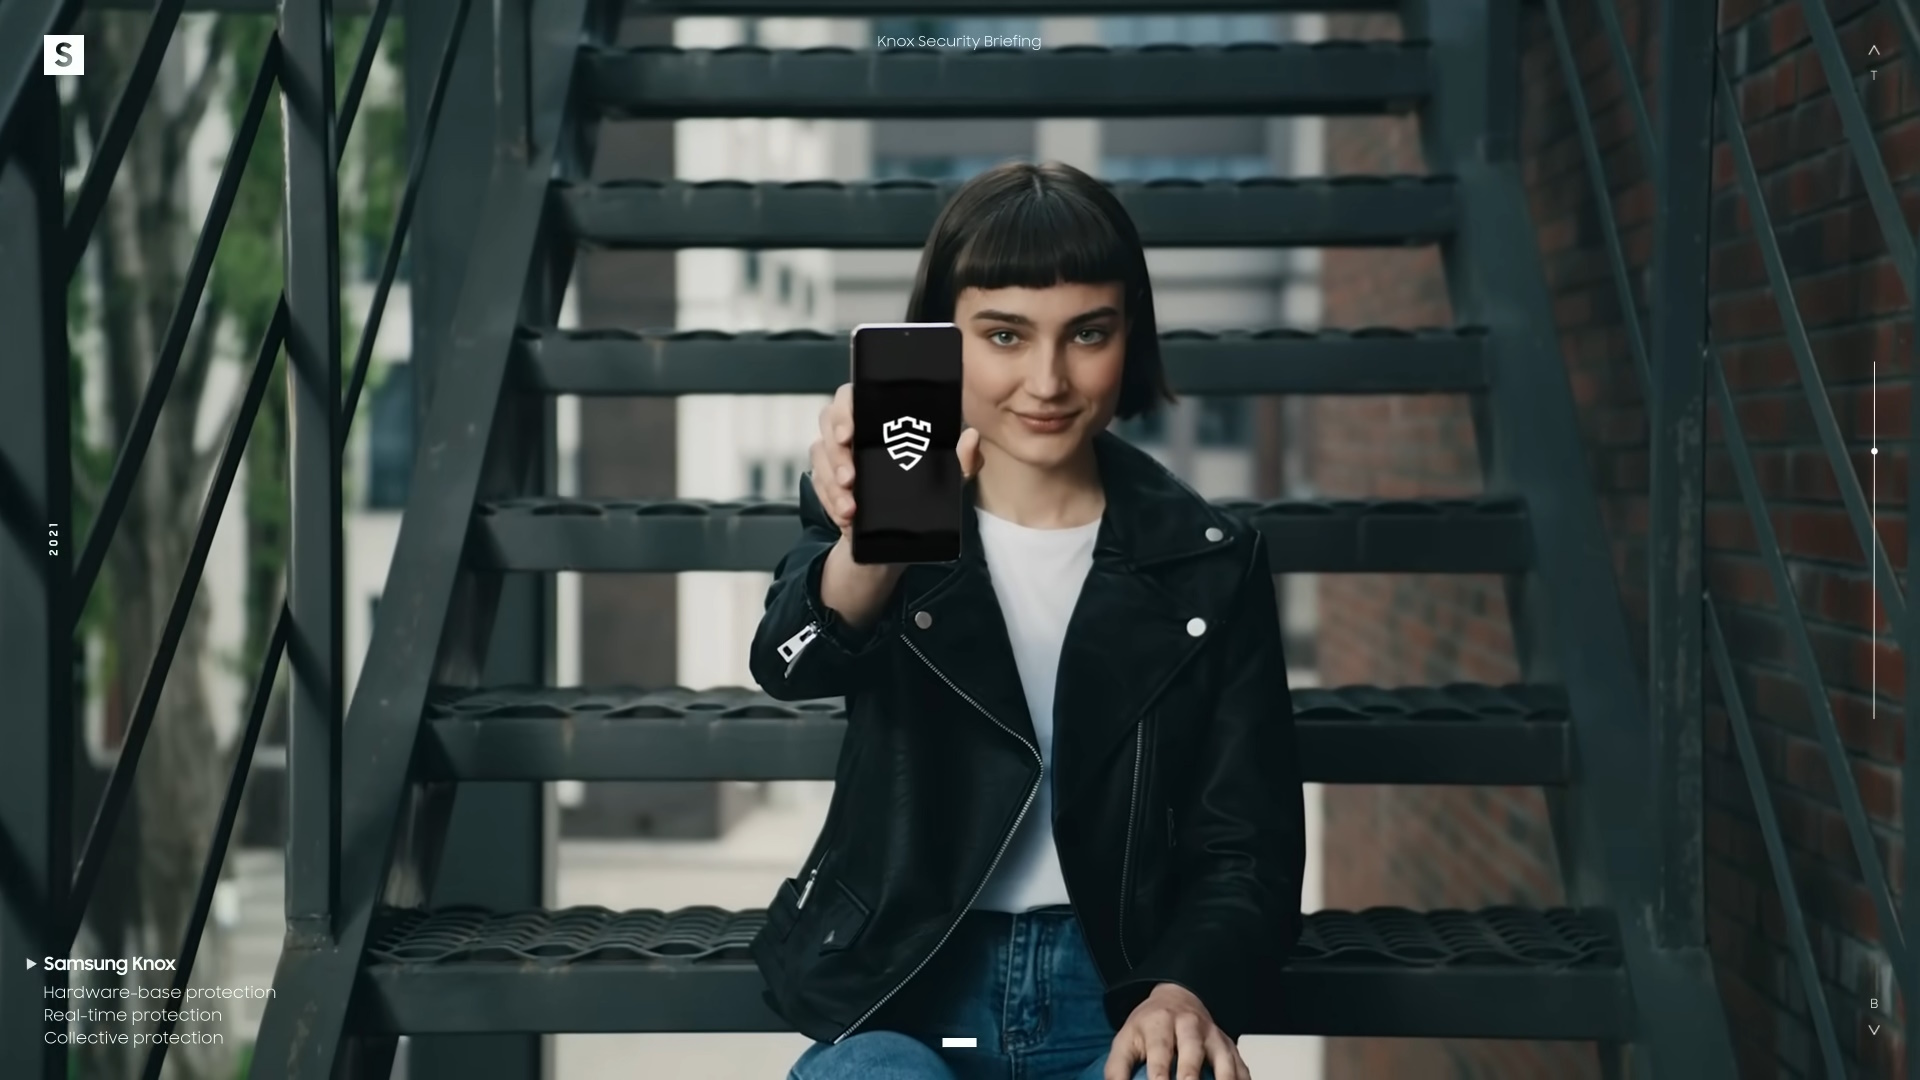 Woman sitting on stairs, holding out a phone that shows the Samsung Knox logo